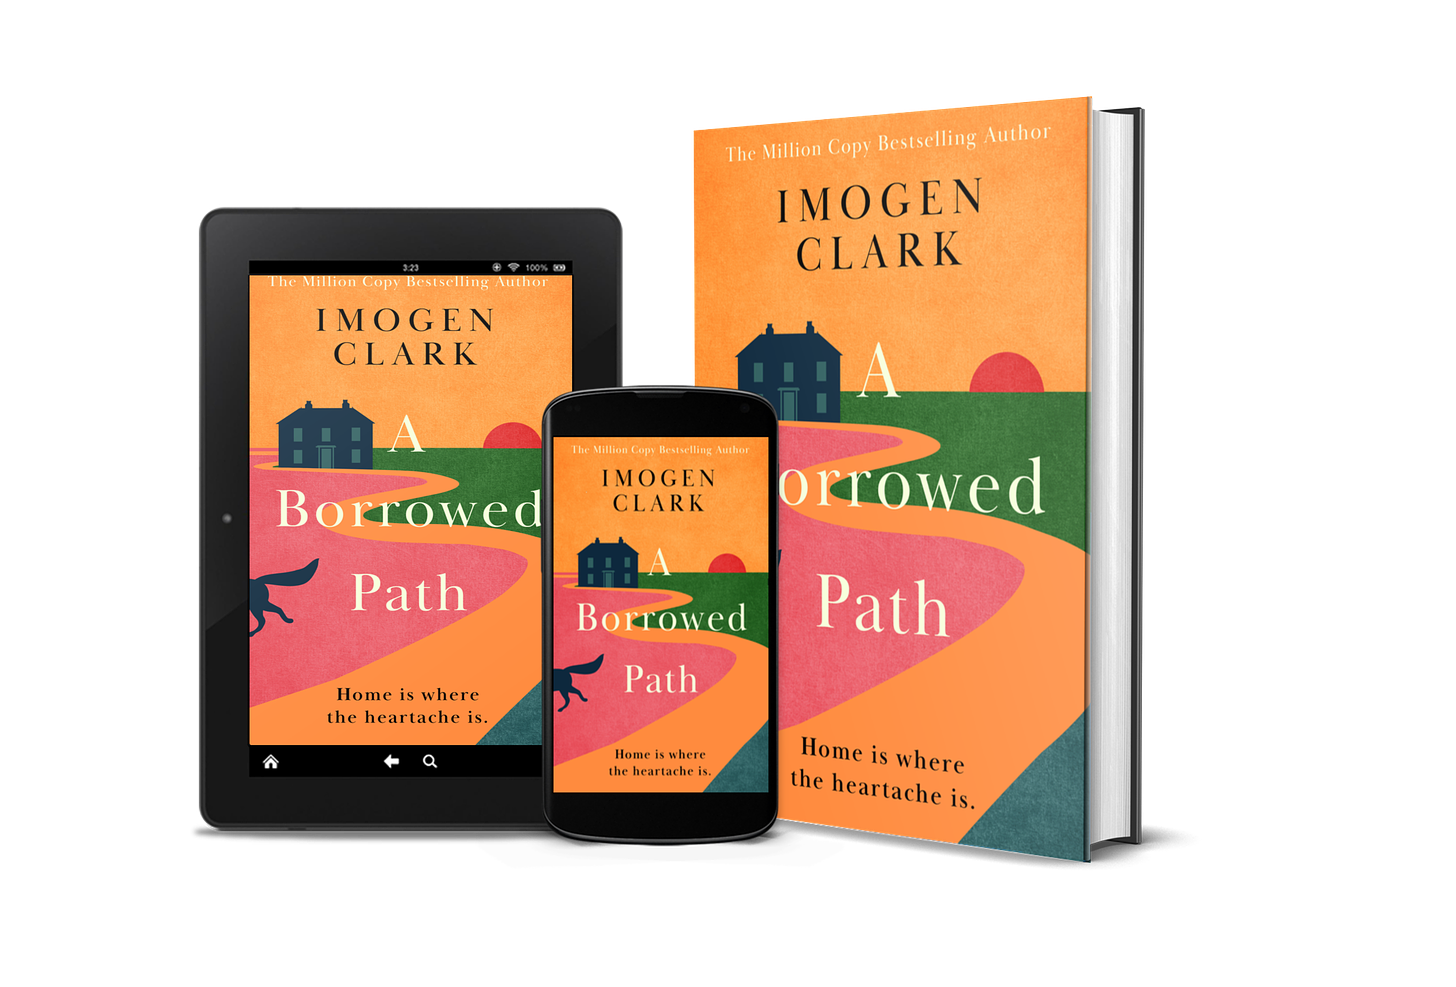 Image shows copies of A Borrowed Path by Imogen Clark